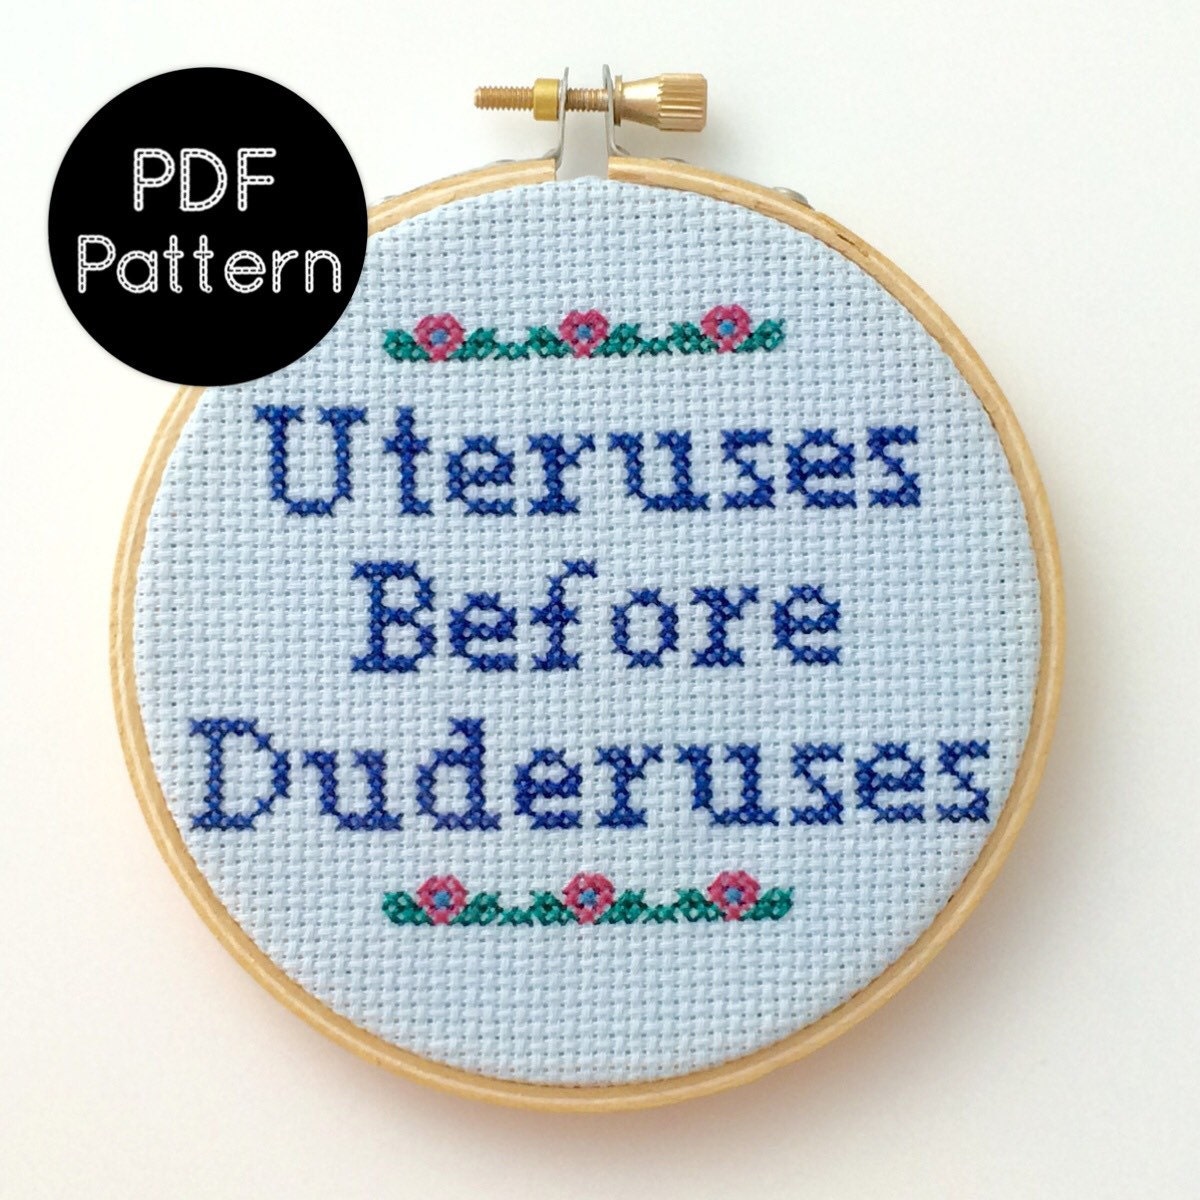 PATTERN - Uteruses Before Duderuses - Parks & Recreation Quote - Funny Cross Stitch ...